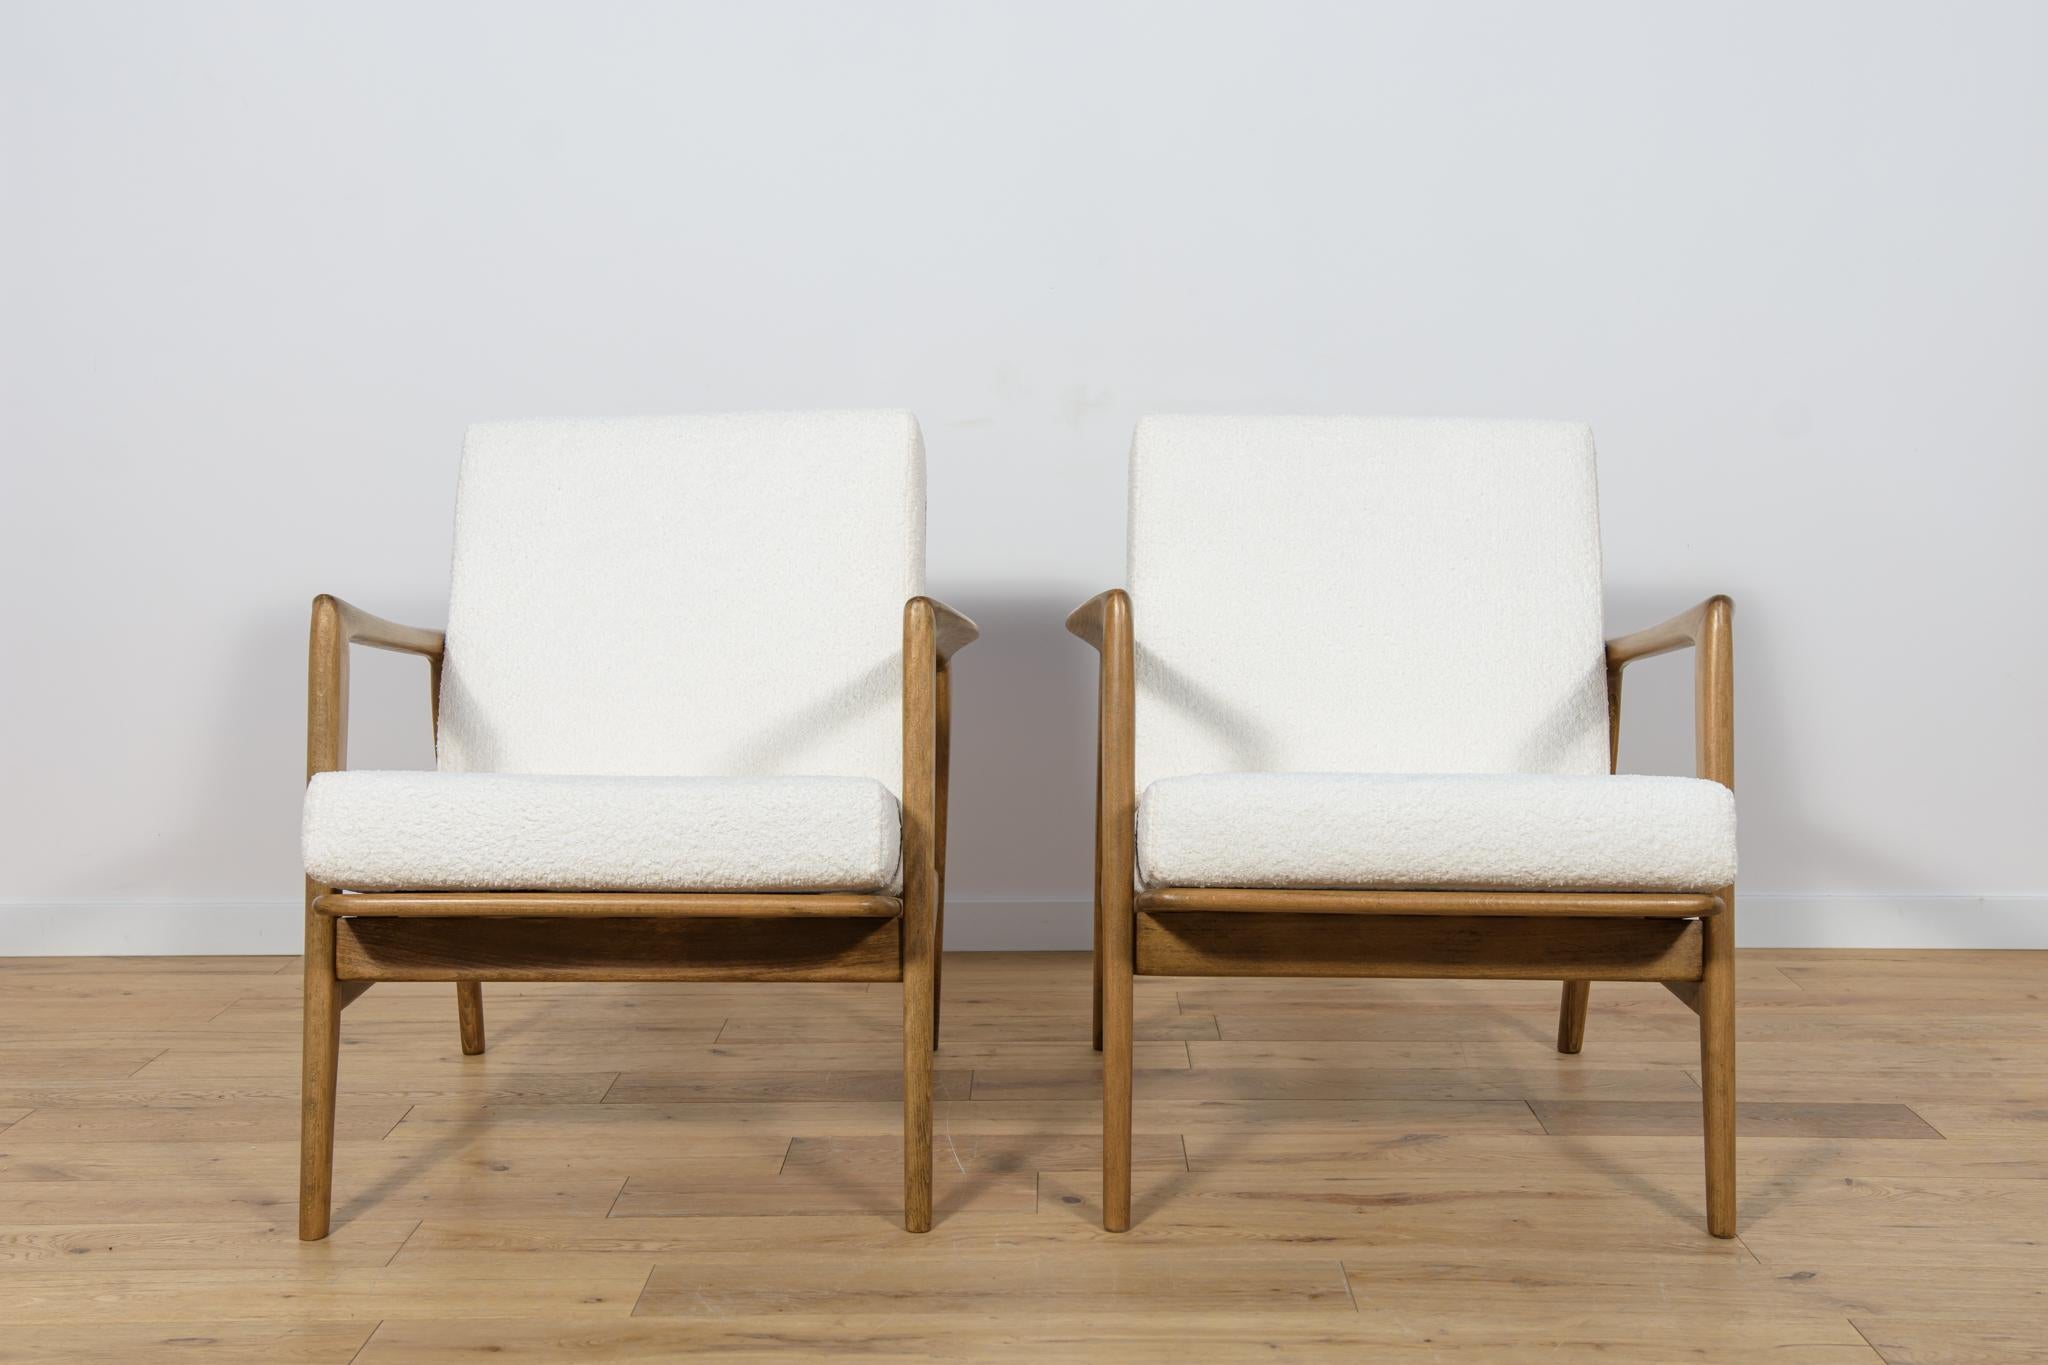 
This pair of armchairs was produced by the Polish company Swarzędzka Furniture Factory in 60s. Comfortable armchairs with a unique form. Cushions replaced with new ones, upholstered in high-quality boucle typ fabric in a white color. The beech